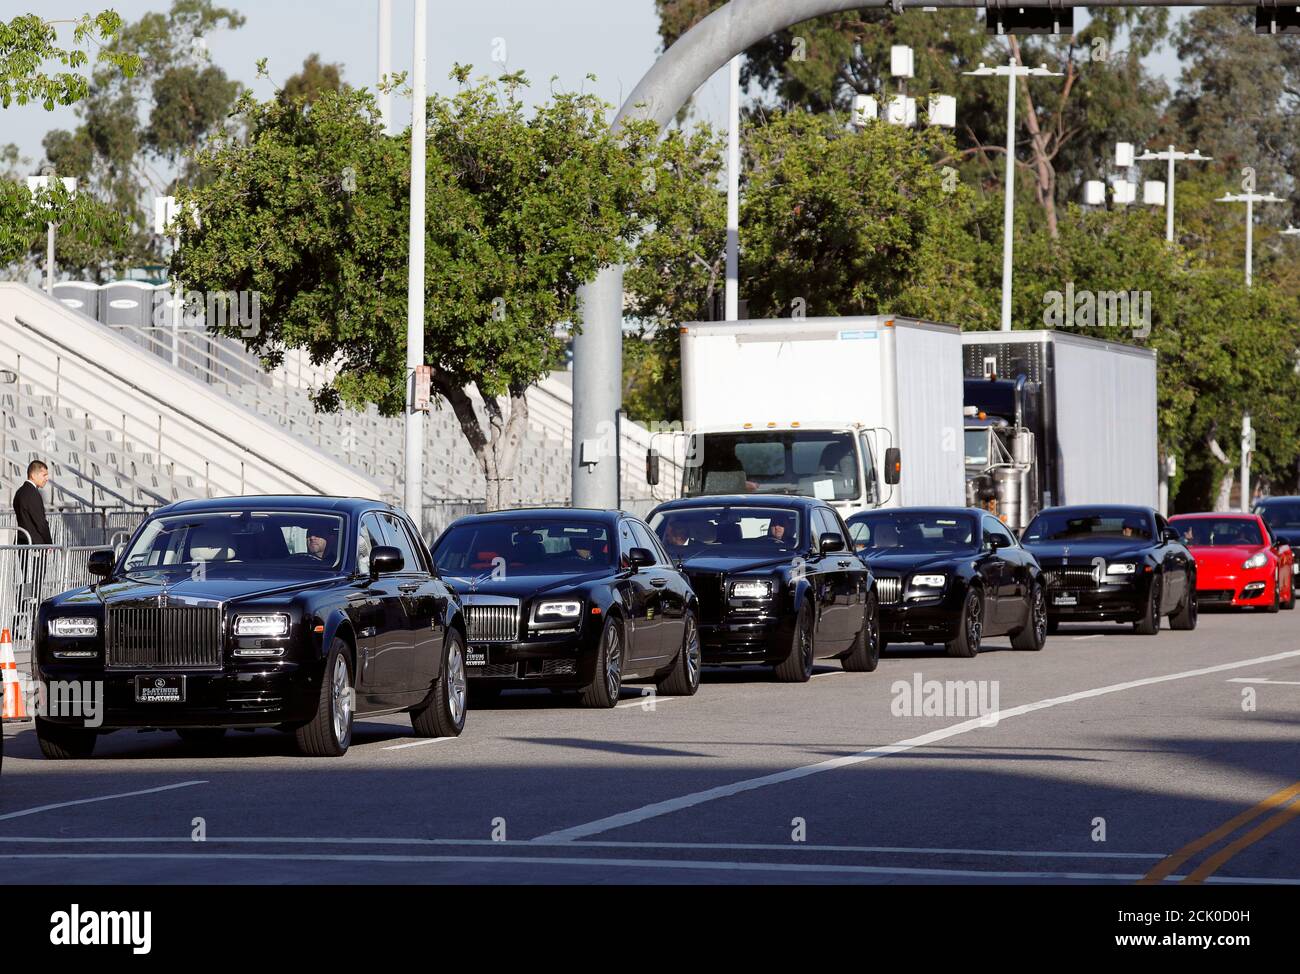 A motorcade arrives at Staples Center ahead of a memorial for rapper Nipsey Hussle in Los Angeles, California, April 11, 2019.  REUTERS/Patrick T. Fallon Stock Photo